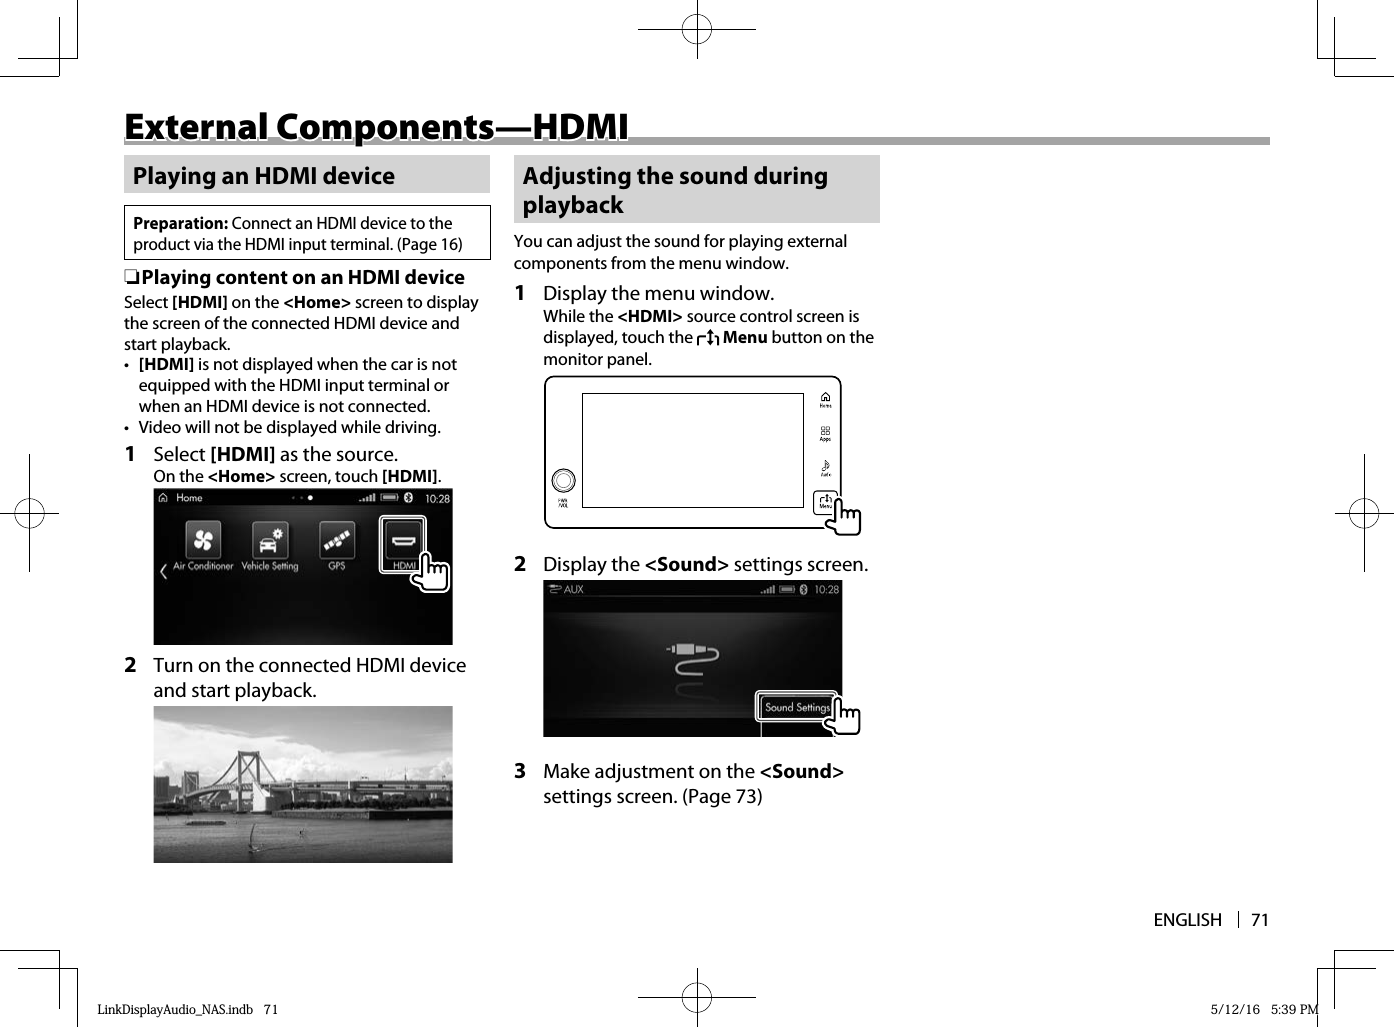 ENGLISH 71External Components—HDMIExternal Components—HDMIPlaying an HDMI devicePreparation: Connect an HDMI device to the product via the HDMI input terminal. (Page 16) ❏ Playing content on an HDMI deviceSelect [HDMI] on the &lt;Home&gt; screen to display the screen of the connected HDMI device and start playback.•  [HDMI] is not displayed when the car is not equipped with the HDMI input terminal or when an HDMI device is not connected.•  Video will not be displayed while driving.1 Select [HDMI] as the source.On the &lt;Home&gt; screen, touch [HDMI]. 2   Turn on the connected HDMI device and start playback.Adjusting the sound during playbackYou can adjust the sound for playing external components from the menu window.1  Display the menu window.While the &lt;HDMI&gt; source control screen is displayed, touch the   Menu button on the monitor panel.  2 Display the &lt;Sound&gt; settings screen.  3  Make adjustment on the &lt;Sound&gt; settings screen. (Page 73)LinkDisplayAudio_NAS.indb   71LinkDisplayAudio_NAS.indb   71 5/12/16   5:39 PM5/12/16   5:39 PM